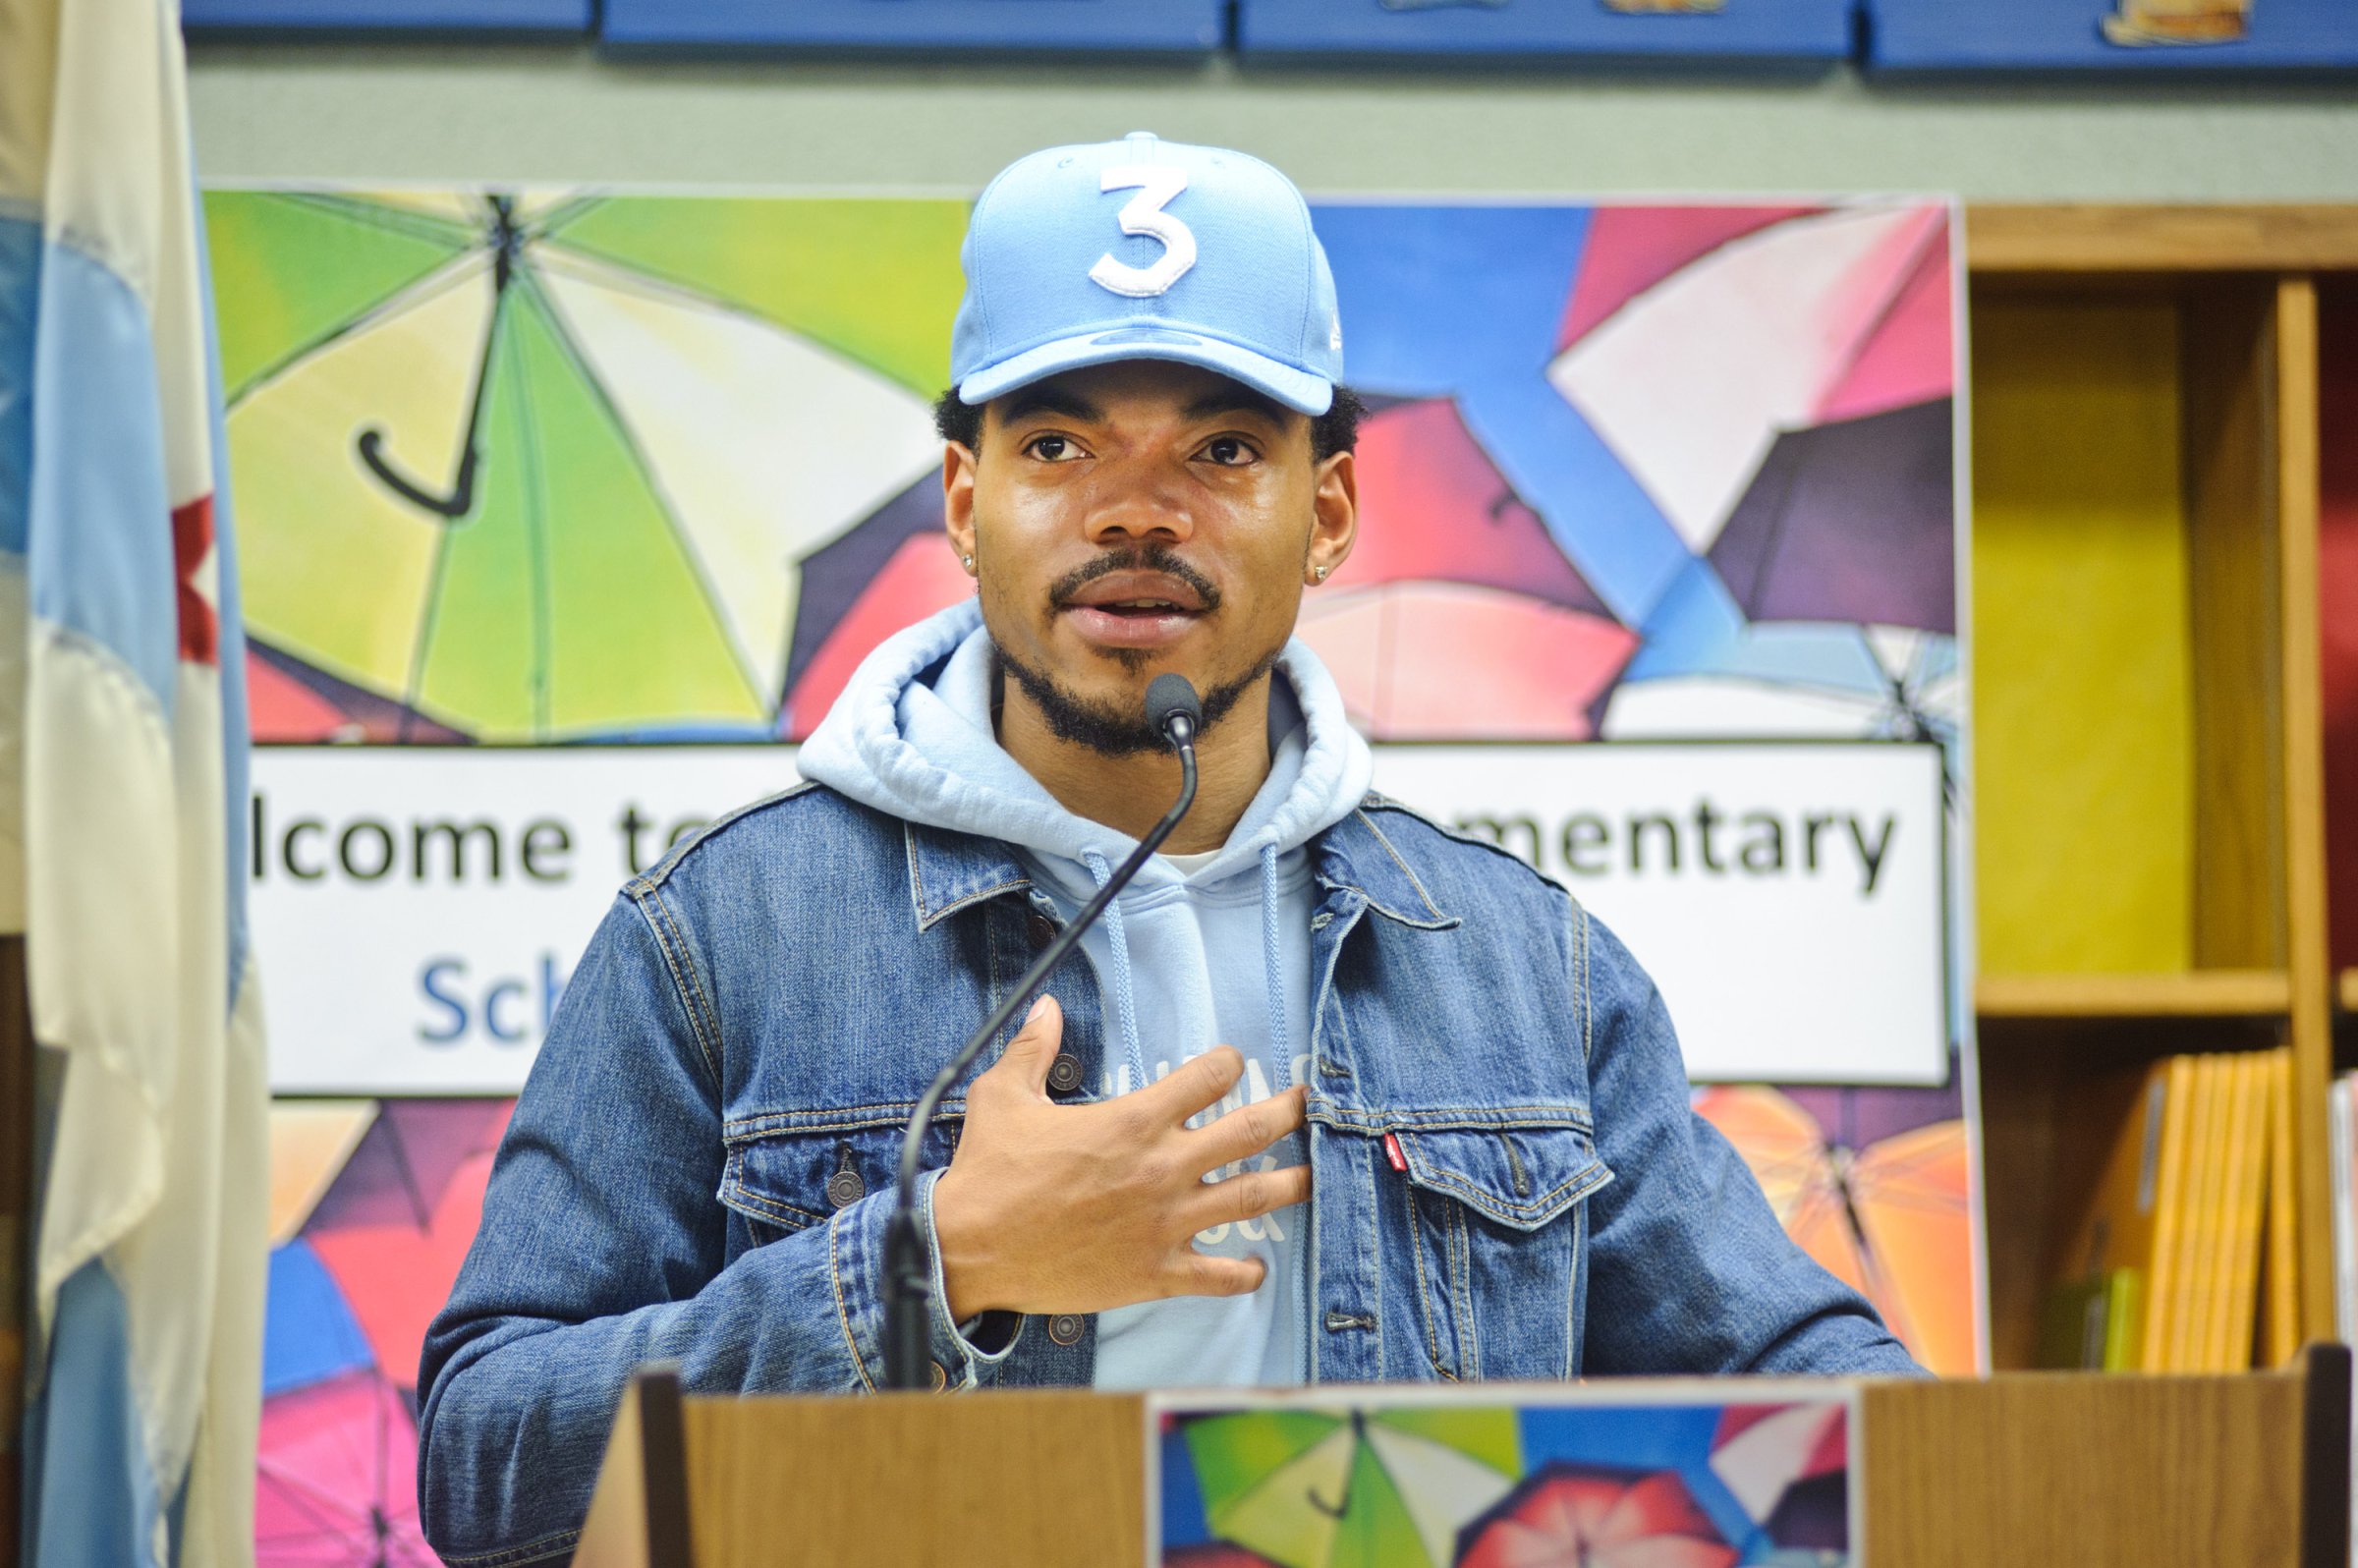 Chance The Rapper holds a press conference and donates $1 Million Dollars to the Chicago Public School Foundation at Westcott Elementary School on March 6, 2017 in Chicago, Ill.